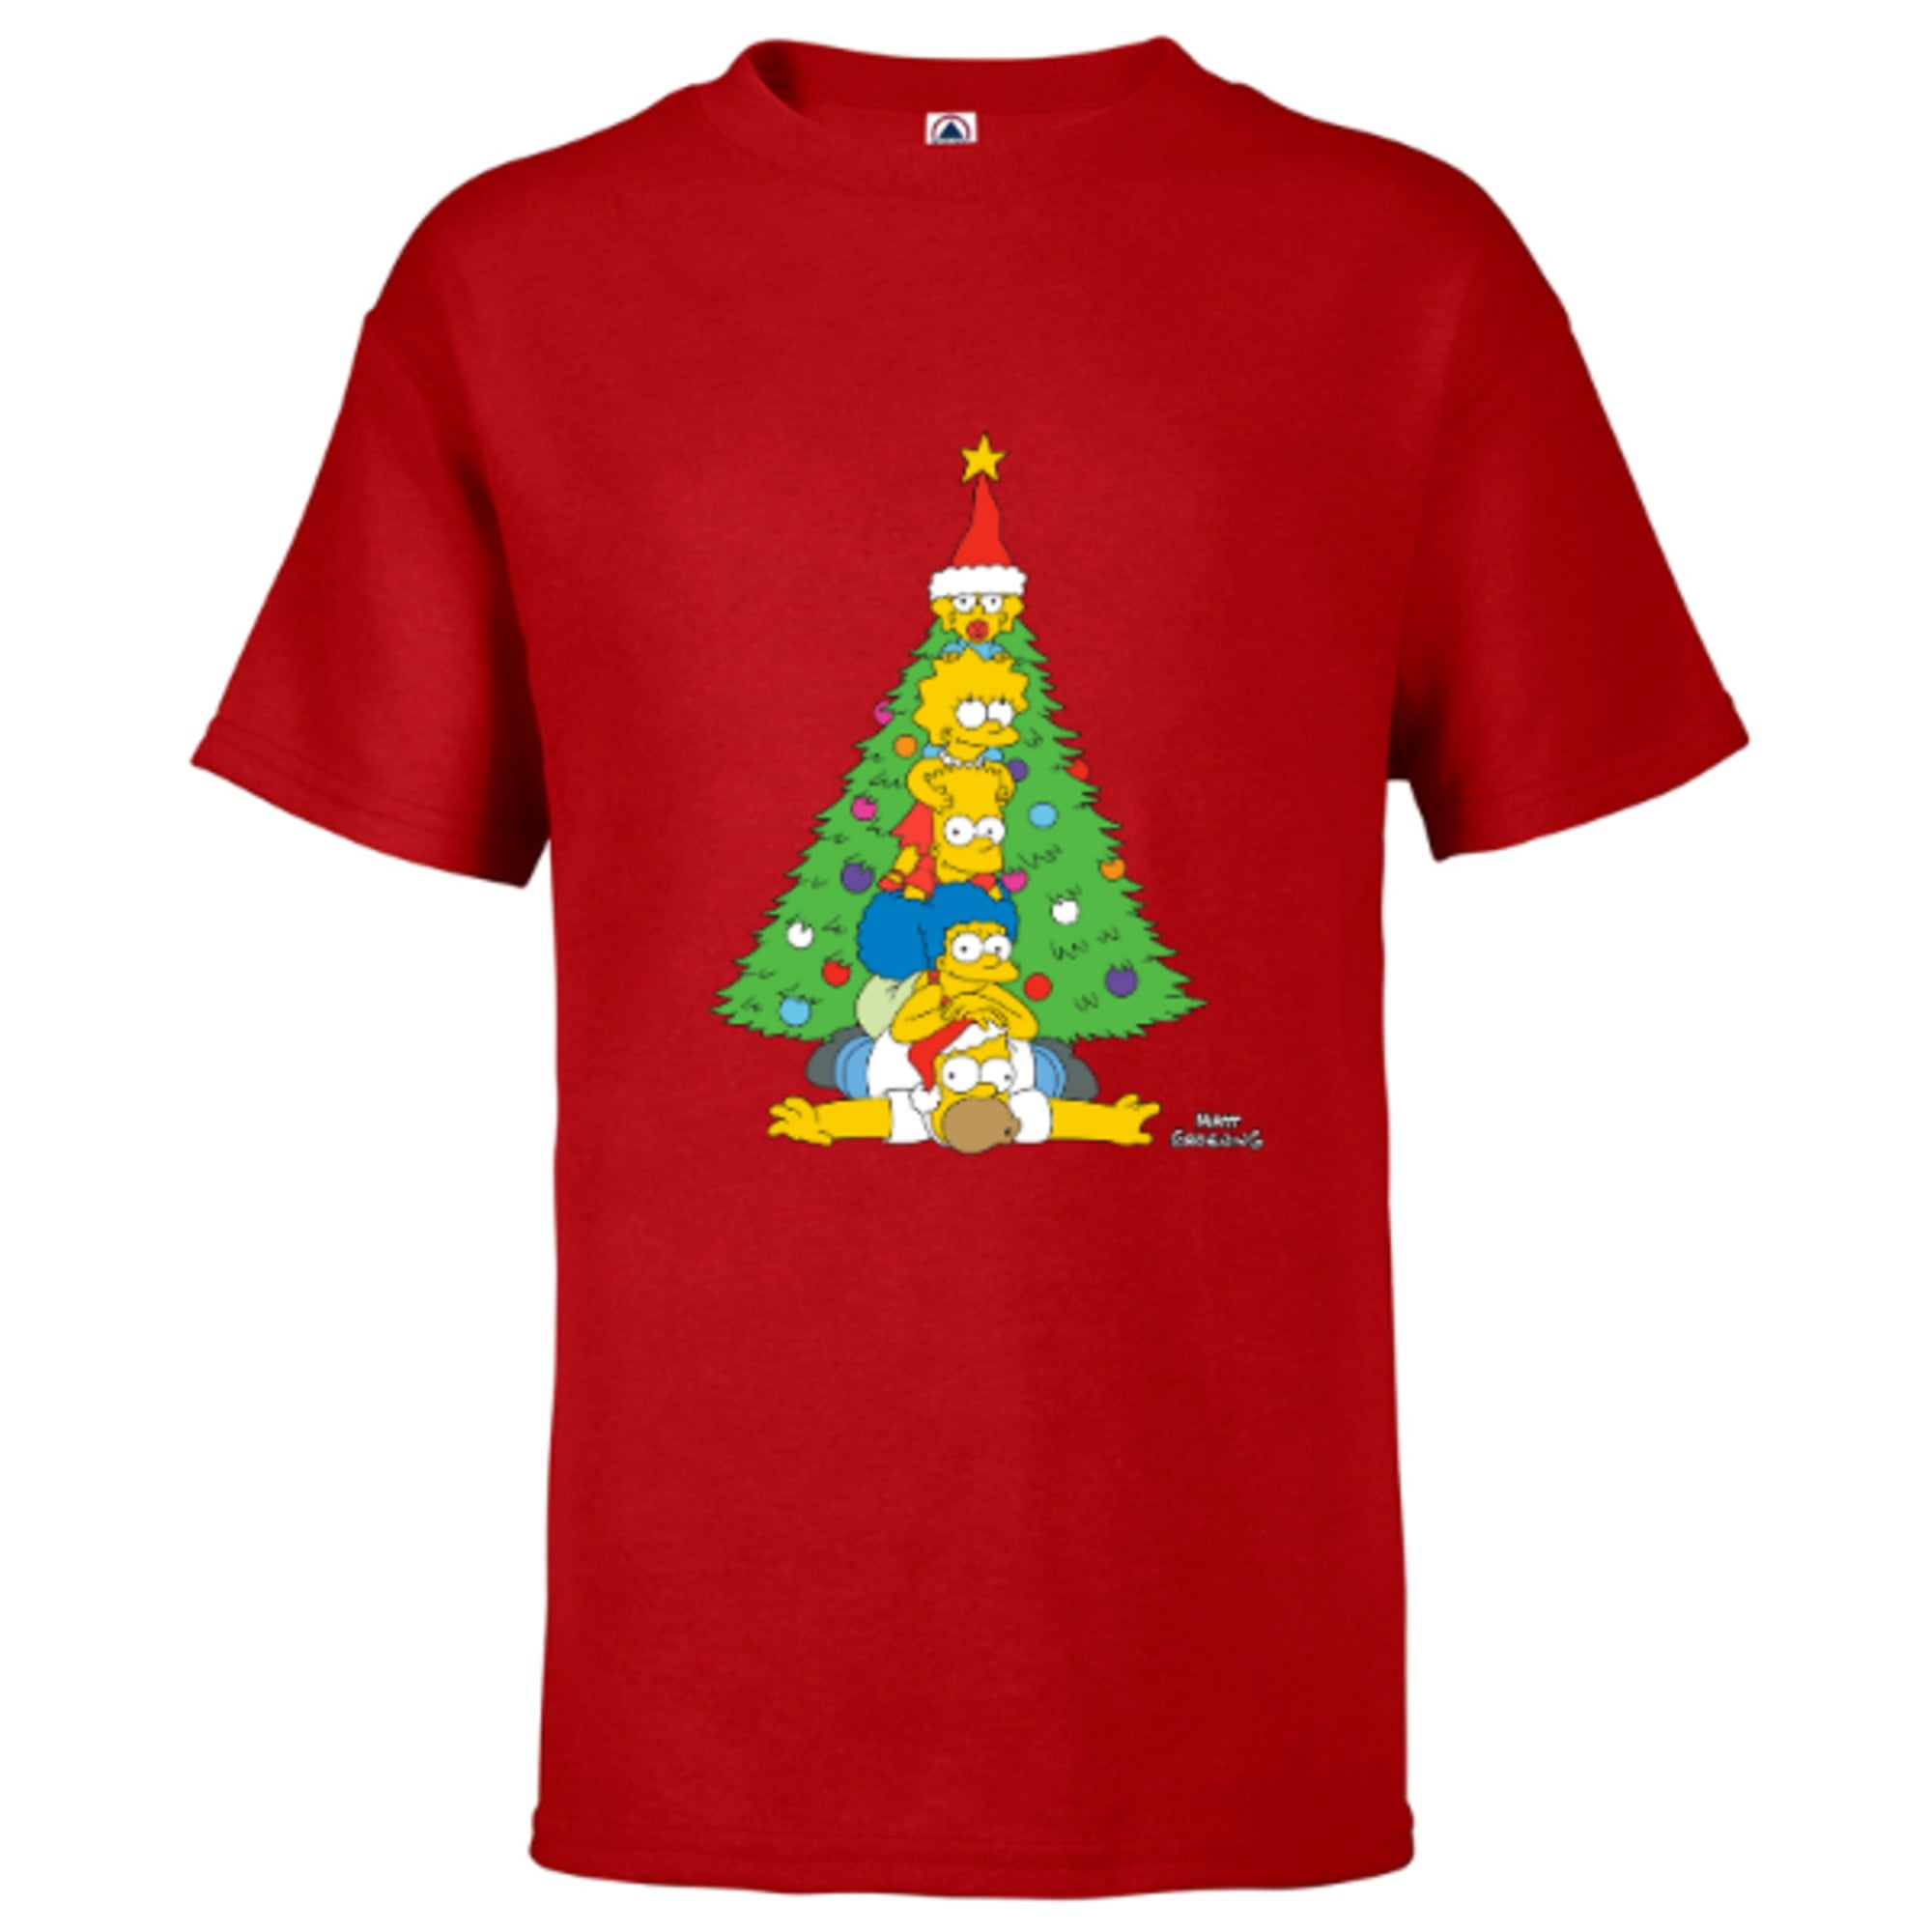 The Simpsons Family Kids – Christmas Sleeve Short for T-Shirt Customized-Soft Holiday Tree Pink 